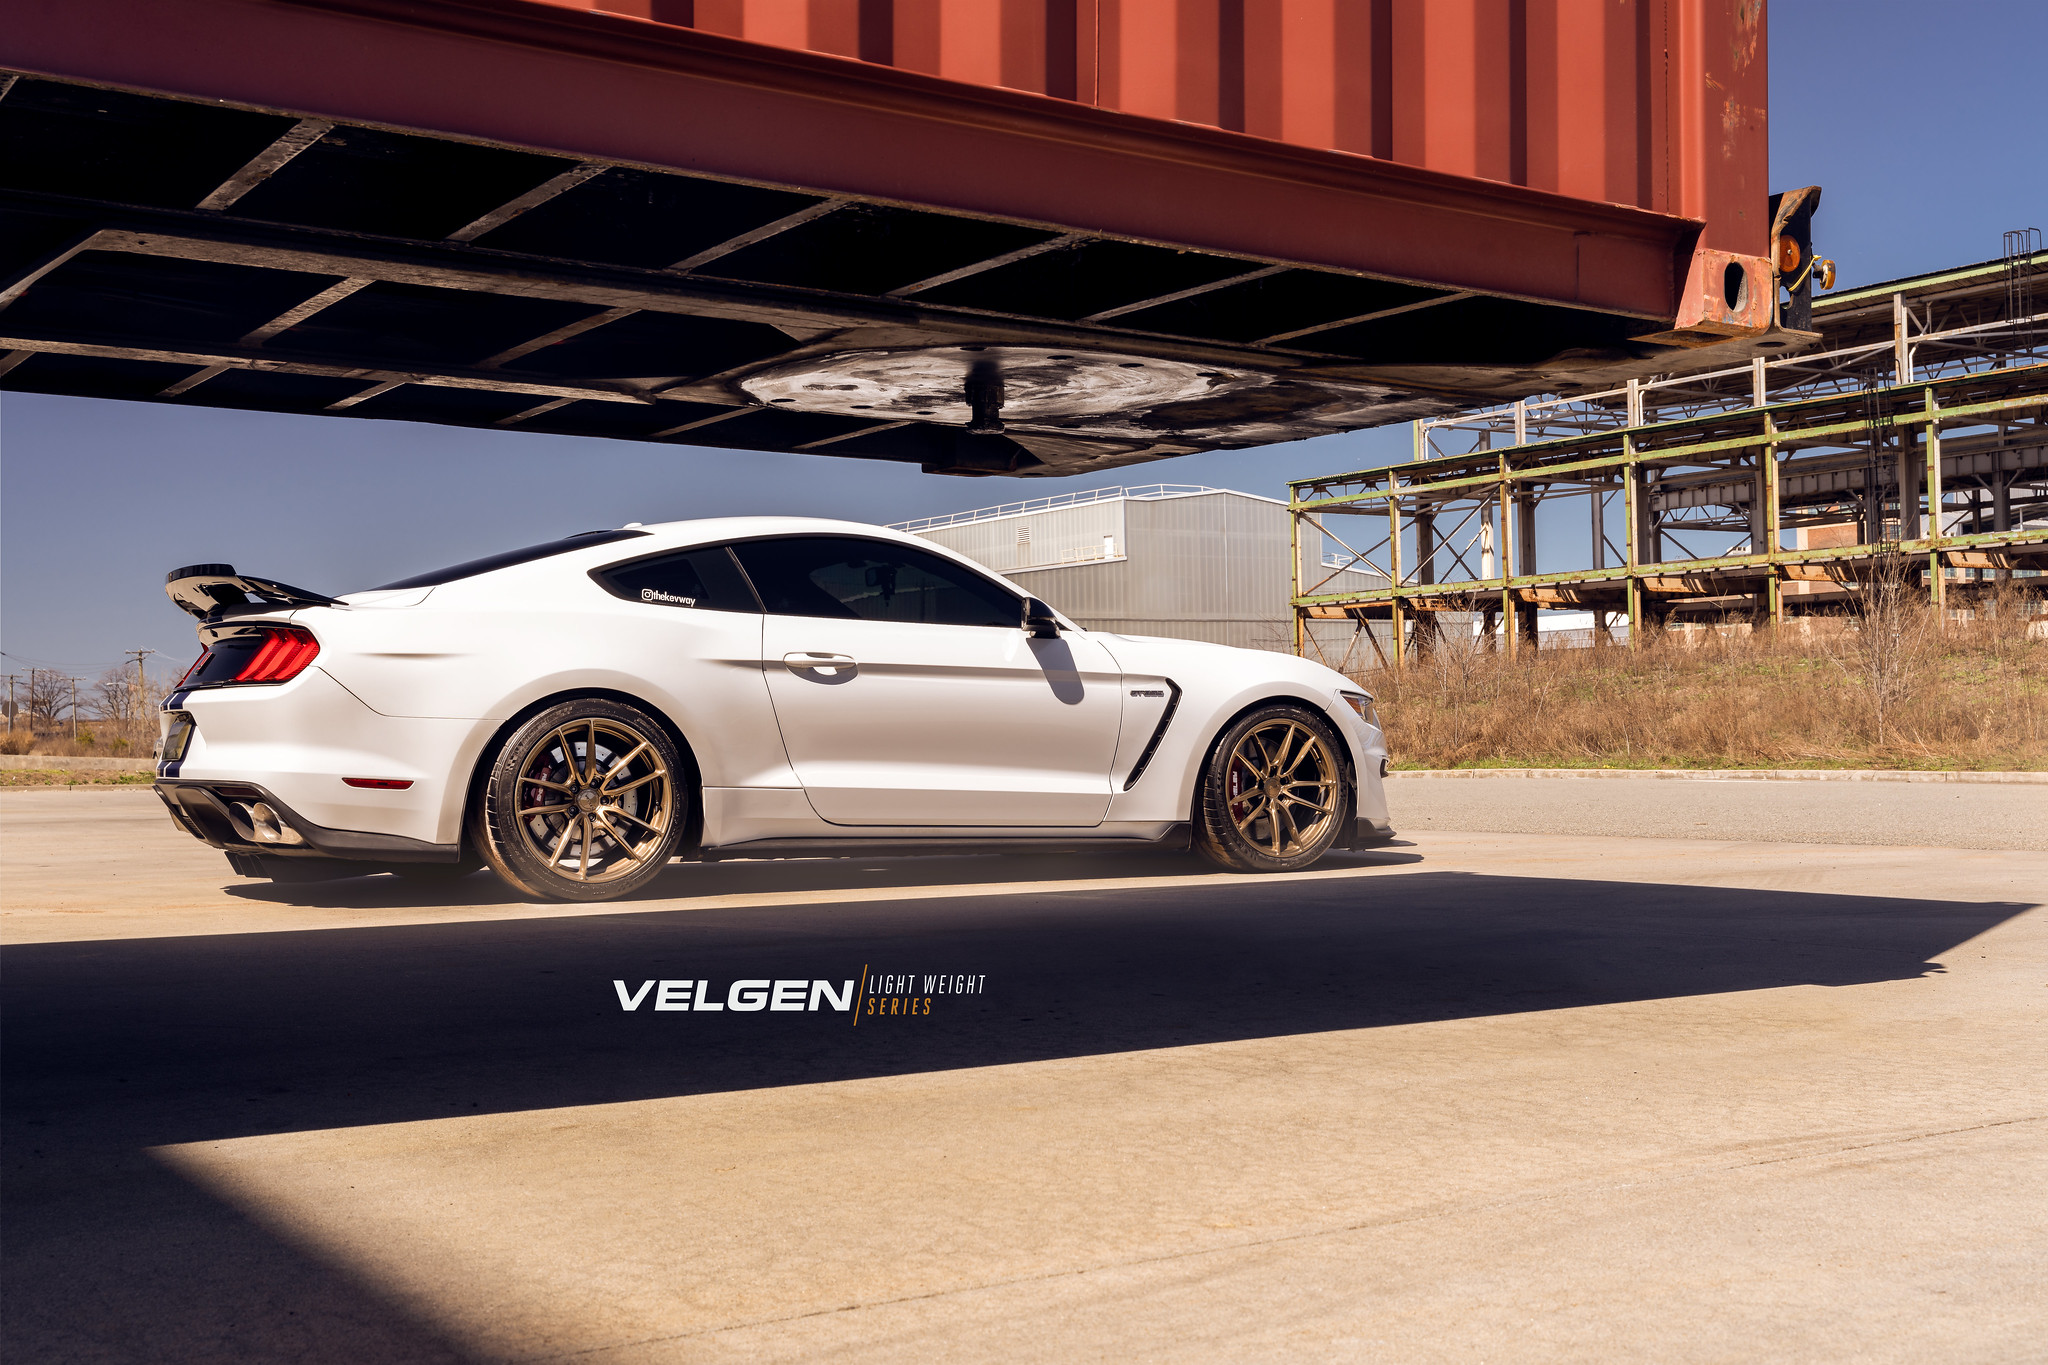 S650 Mustang 19" 20" Velgen Flow Forged Concave Wheels Mustang S650 - Vibe Motorsports Official Thread 52775637917_d0a44d977f_k